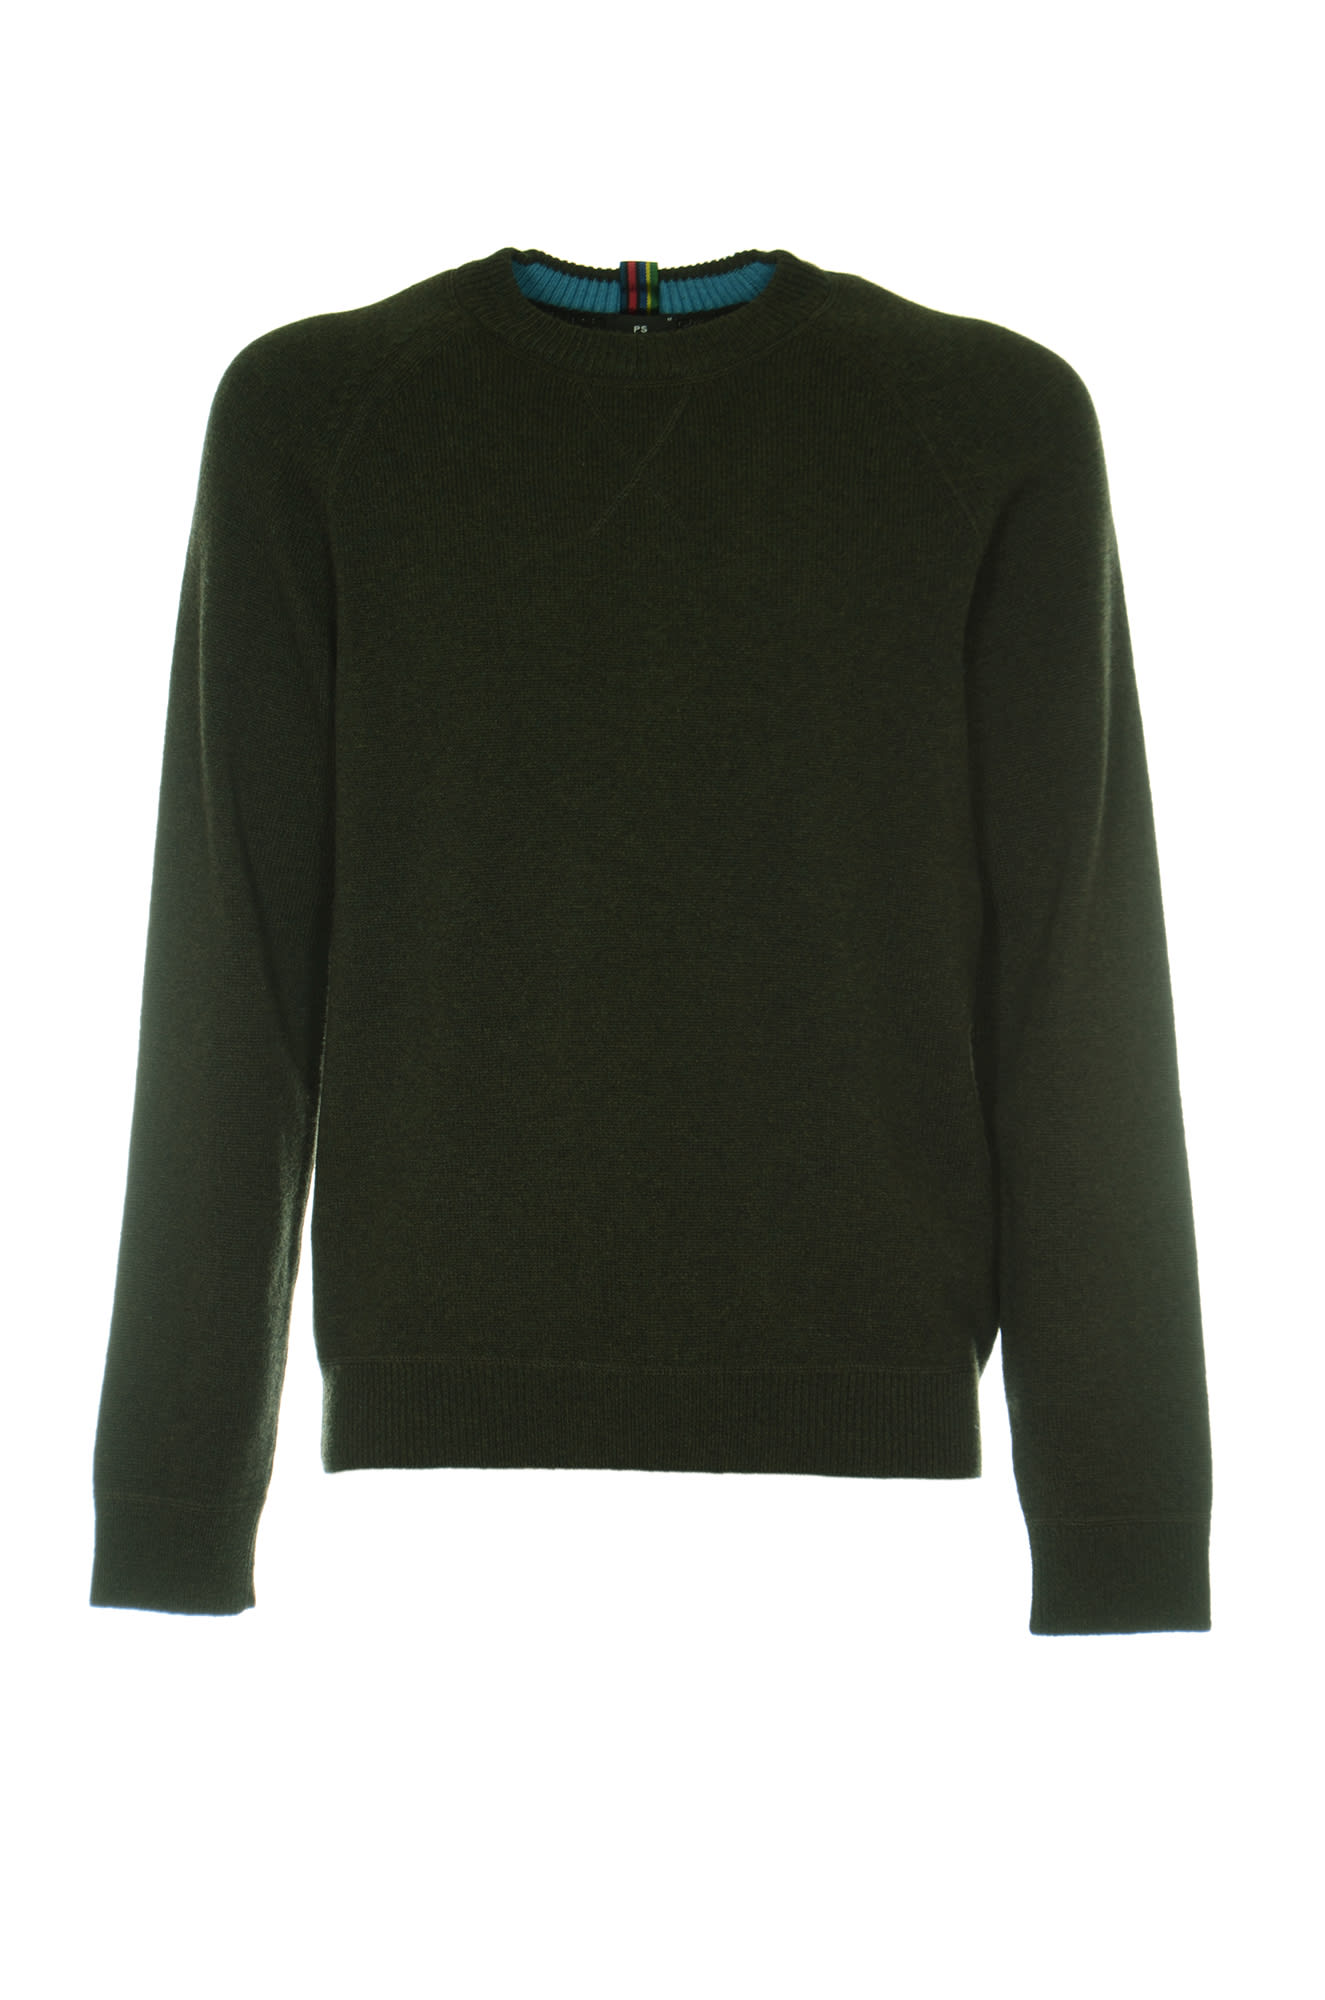 PS by Paul Smith Crewneck Pullover